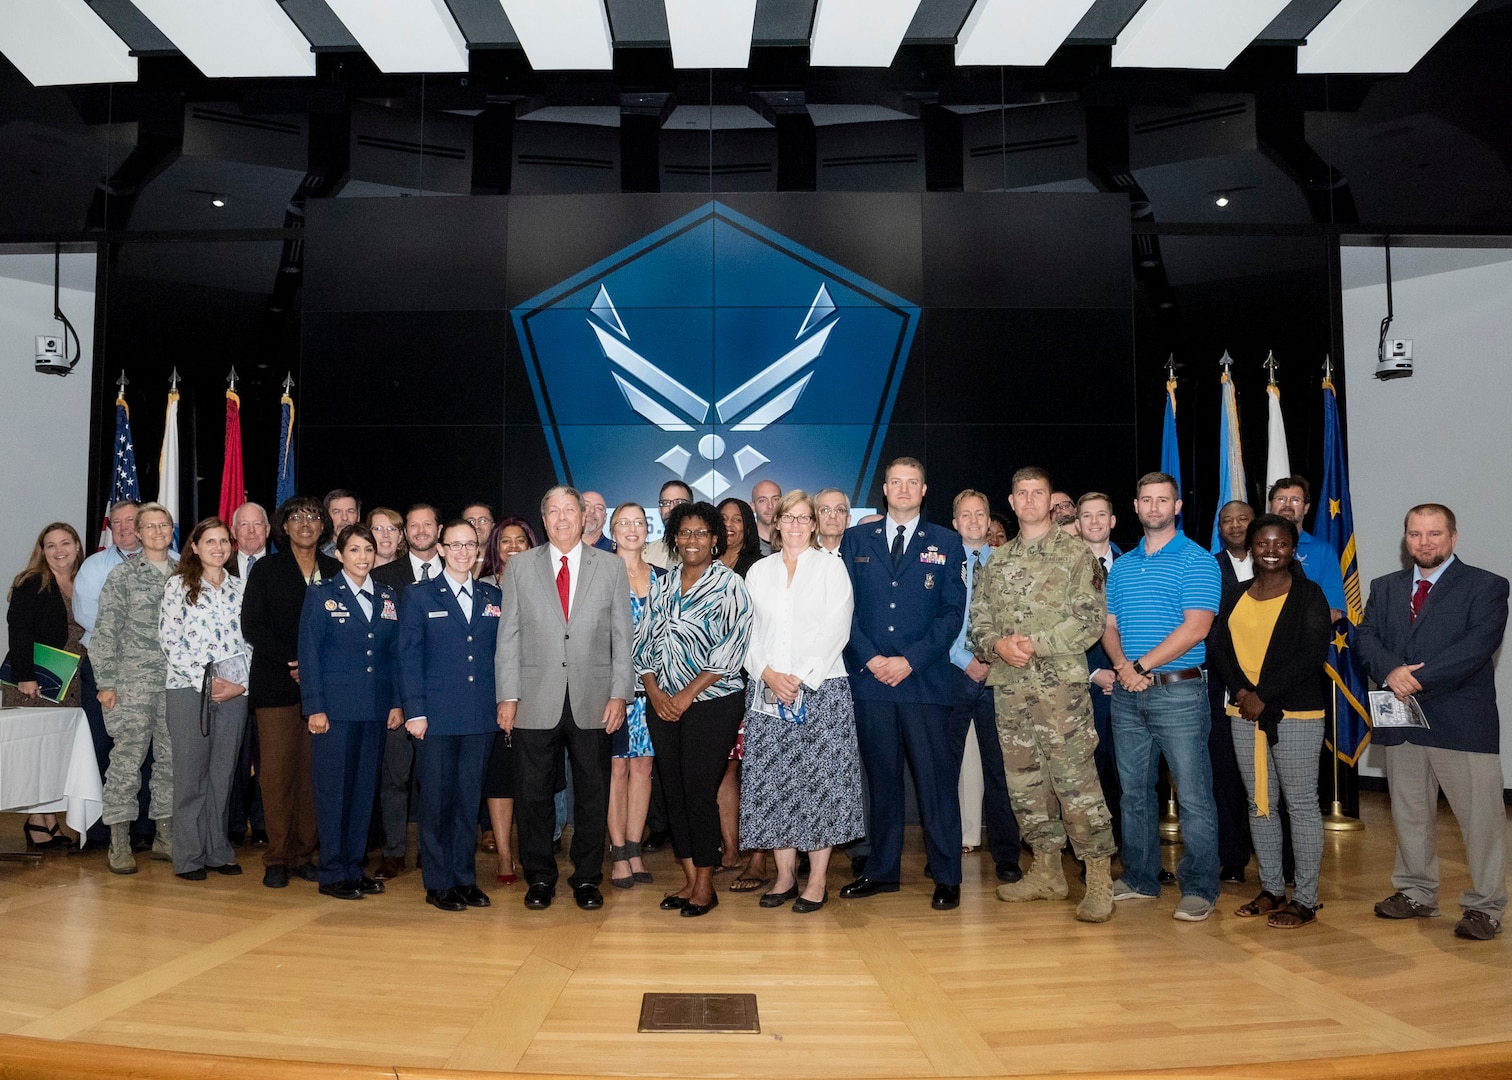 About 50 Air Force members pose for a group photo on a stage.